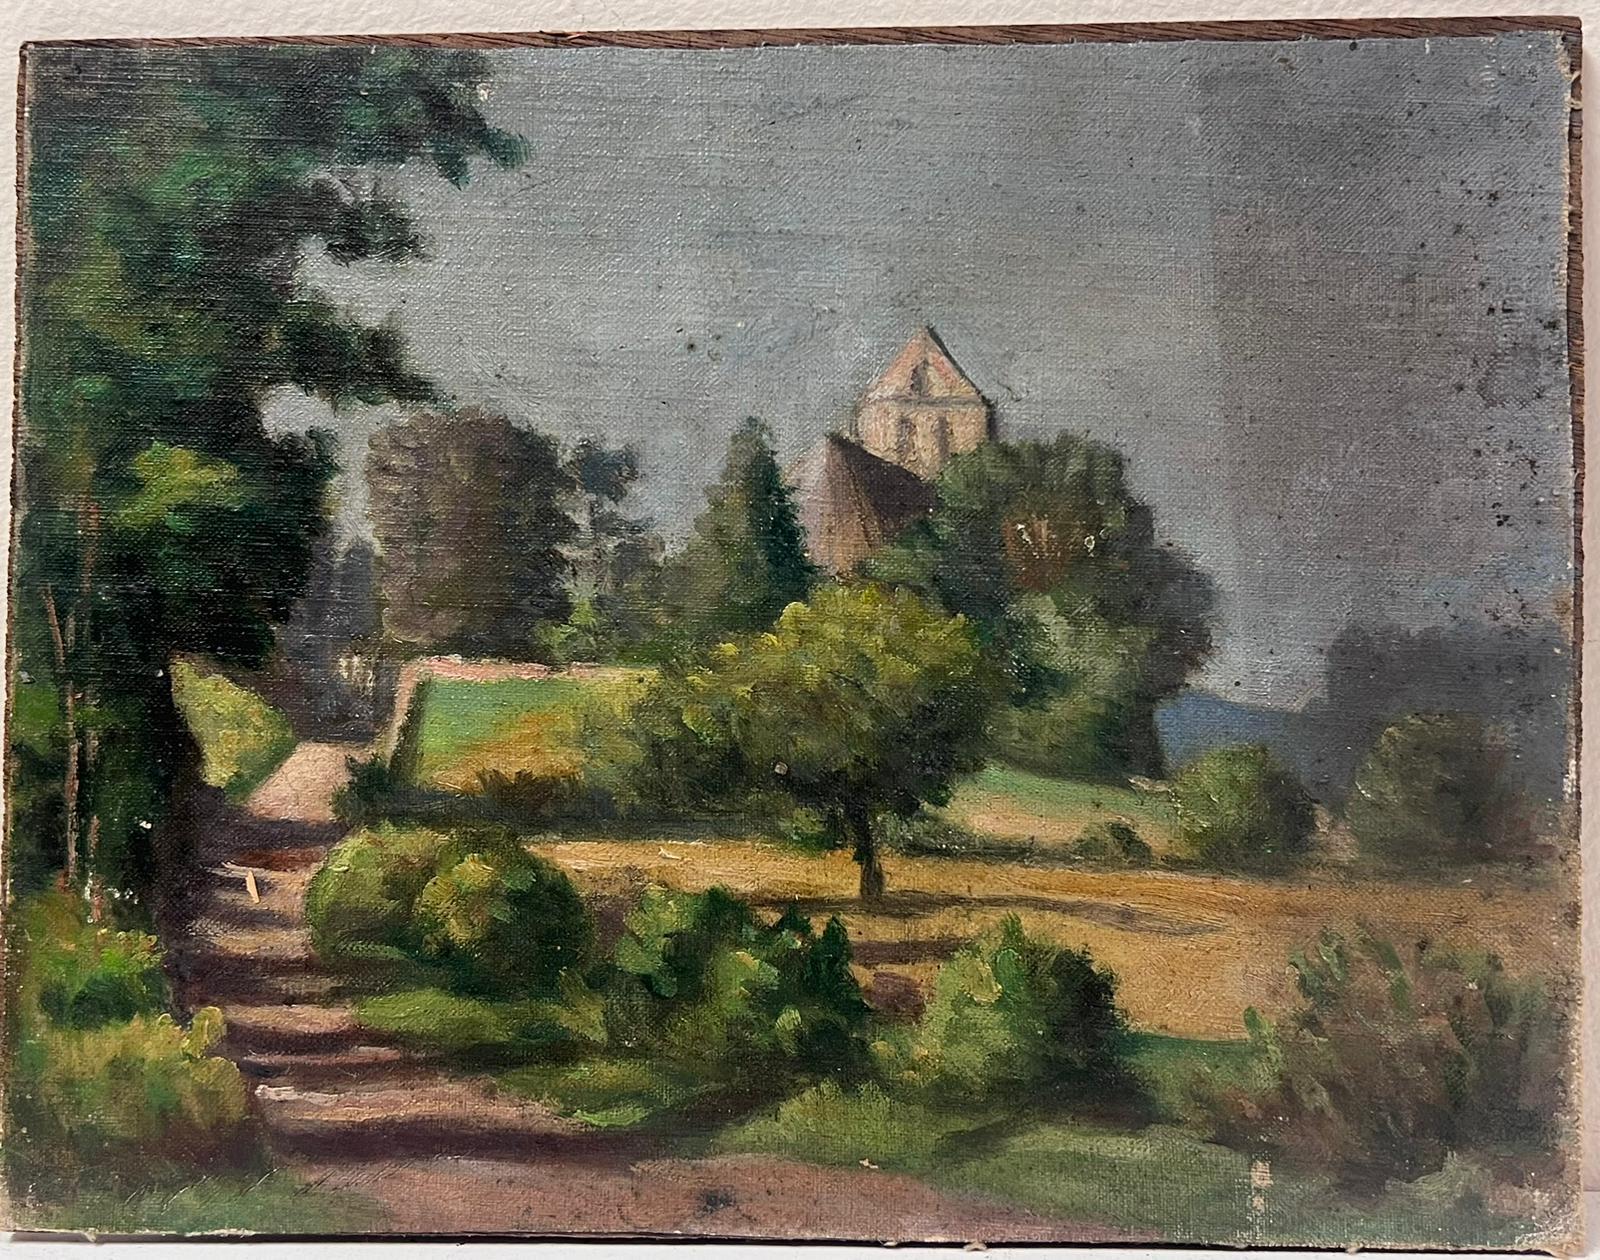 French Countryside Landscape
by Edmond Quinton (French 1892-1969) *see notes below
oil painting on canvas stuck on board/ panel, unframed
size: 7.5 x 9.5 inches
condition: overall good and sound, some age related marks and old dirt, all four corners